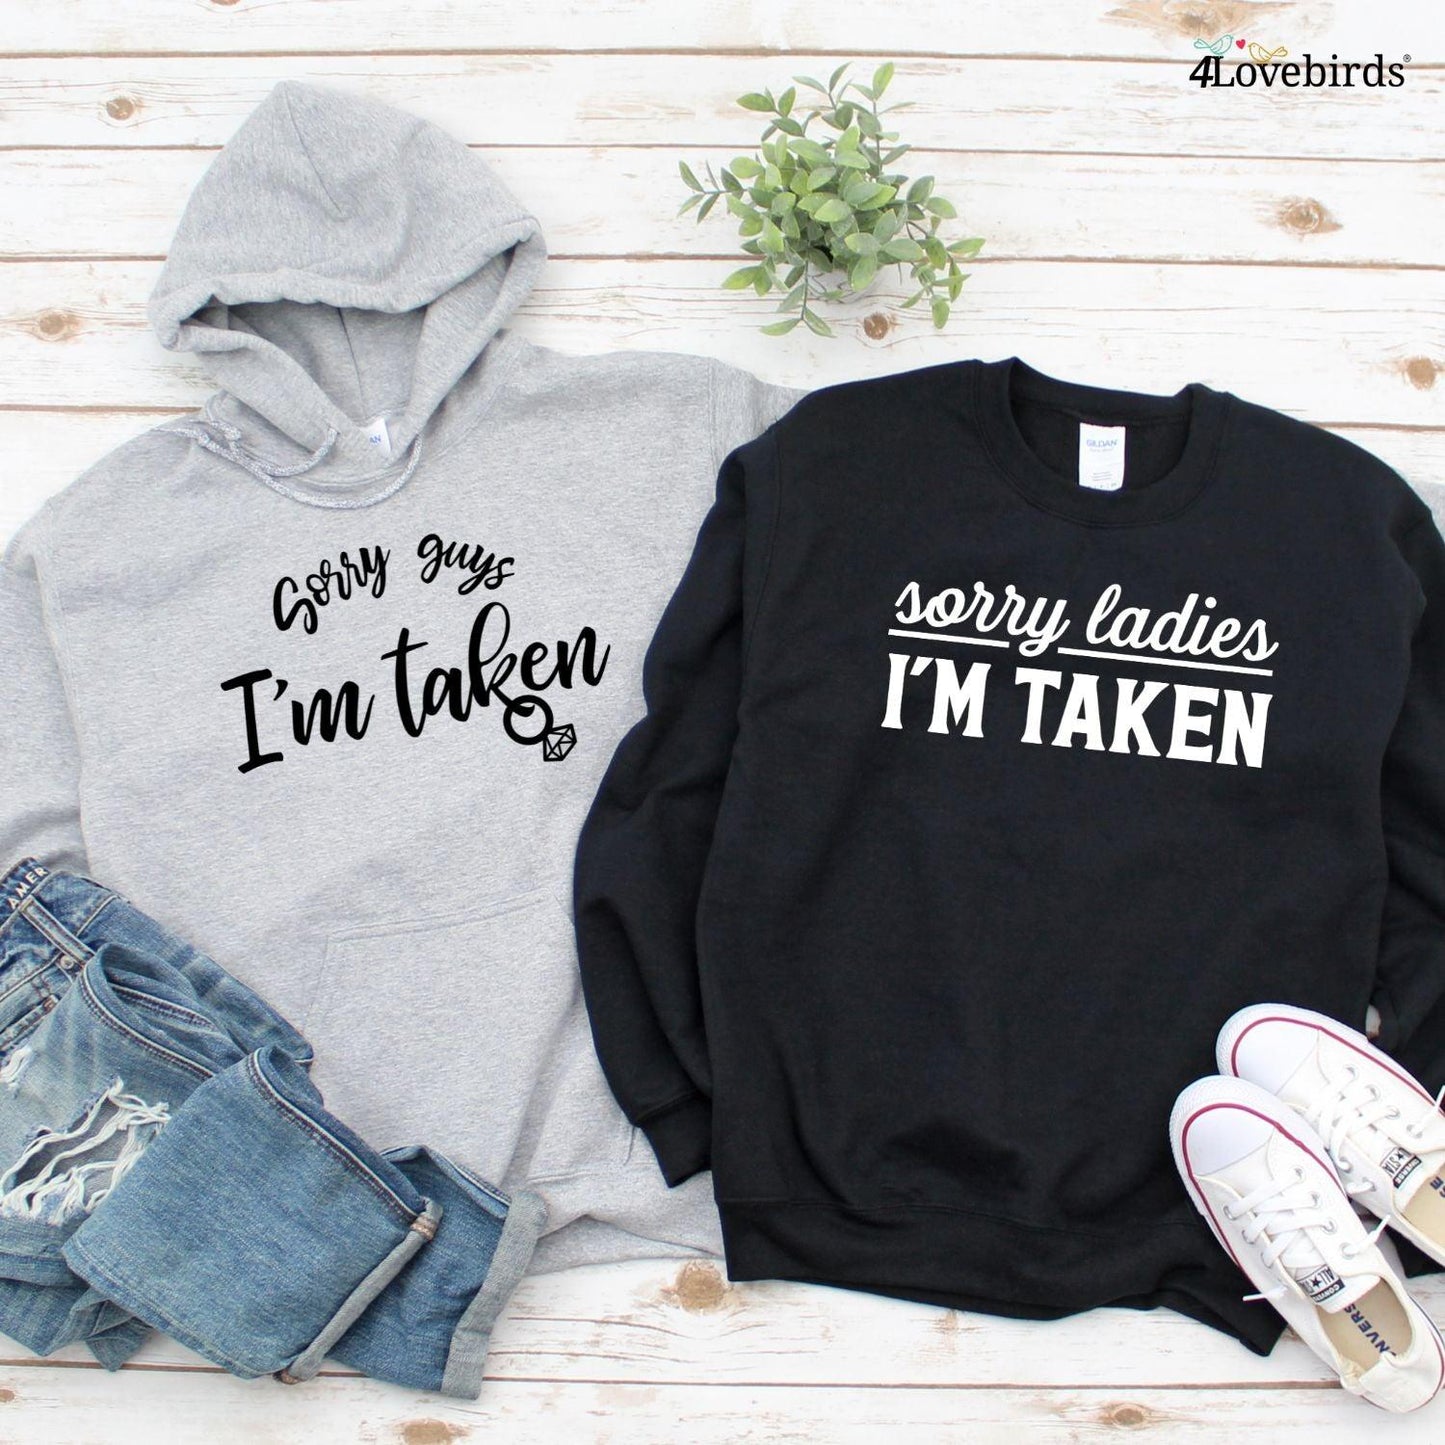 Sorry Ladies/Guys I'm Taken: Hilarious Matching Outfits for Duo, Ideal Bachelorette Gift - 4Lovebirds